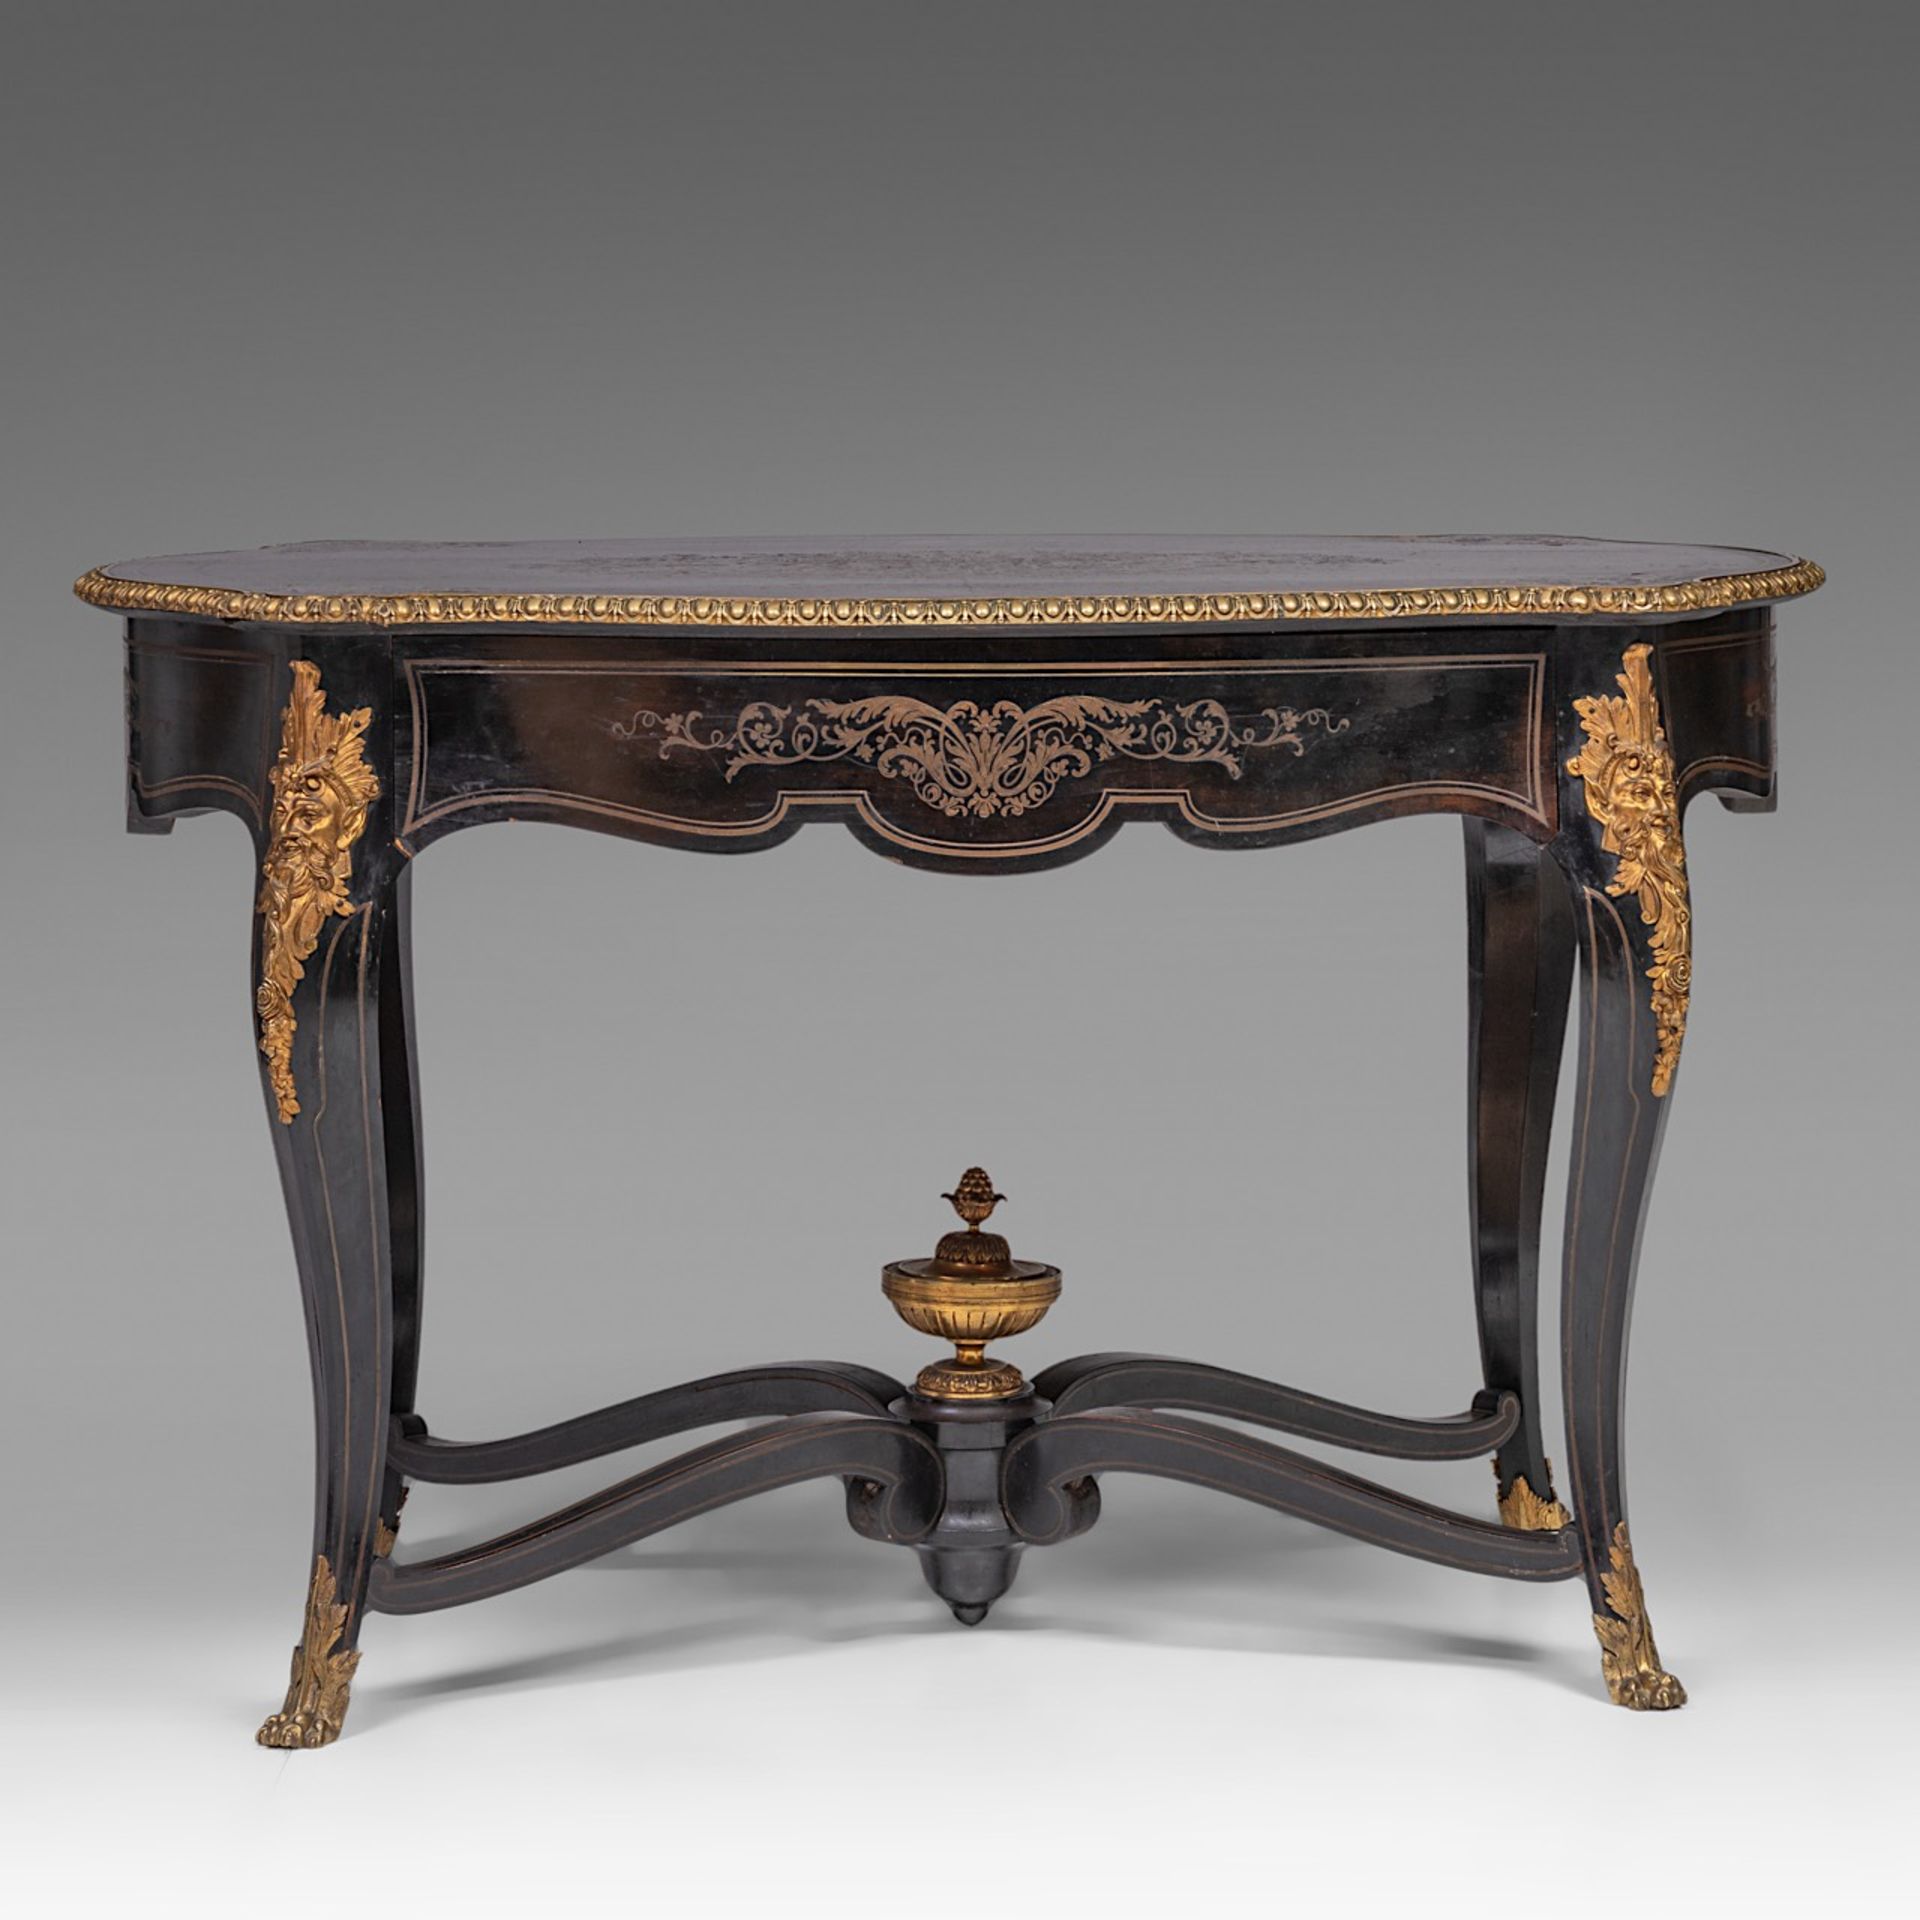 A Napoleon III (1852-1870) Boulle centre table, stamped 'HPR' Henri Picard (1840-1890), H 75 - W 120 - Bild 2 aus 10